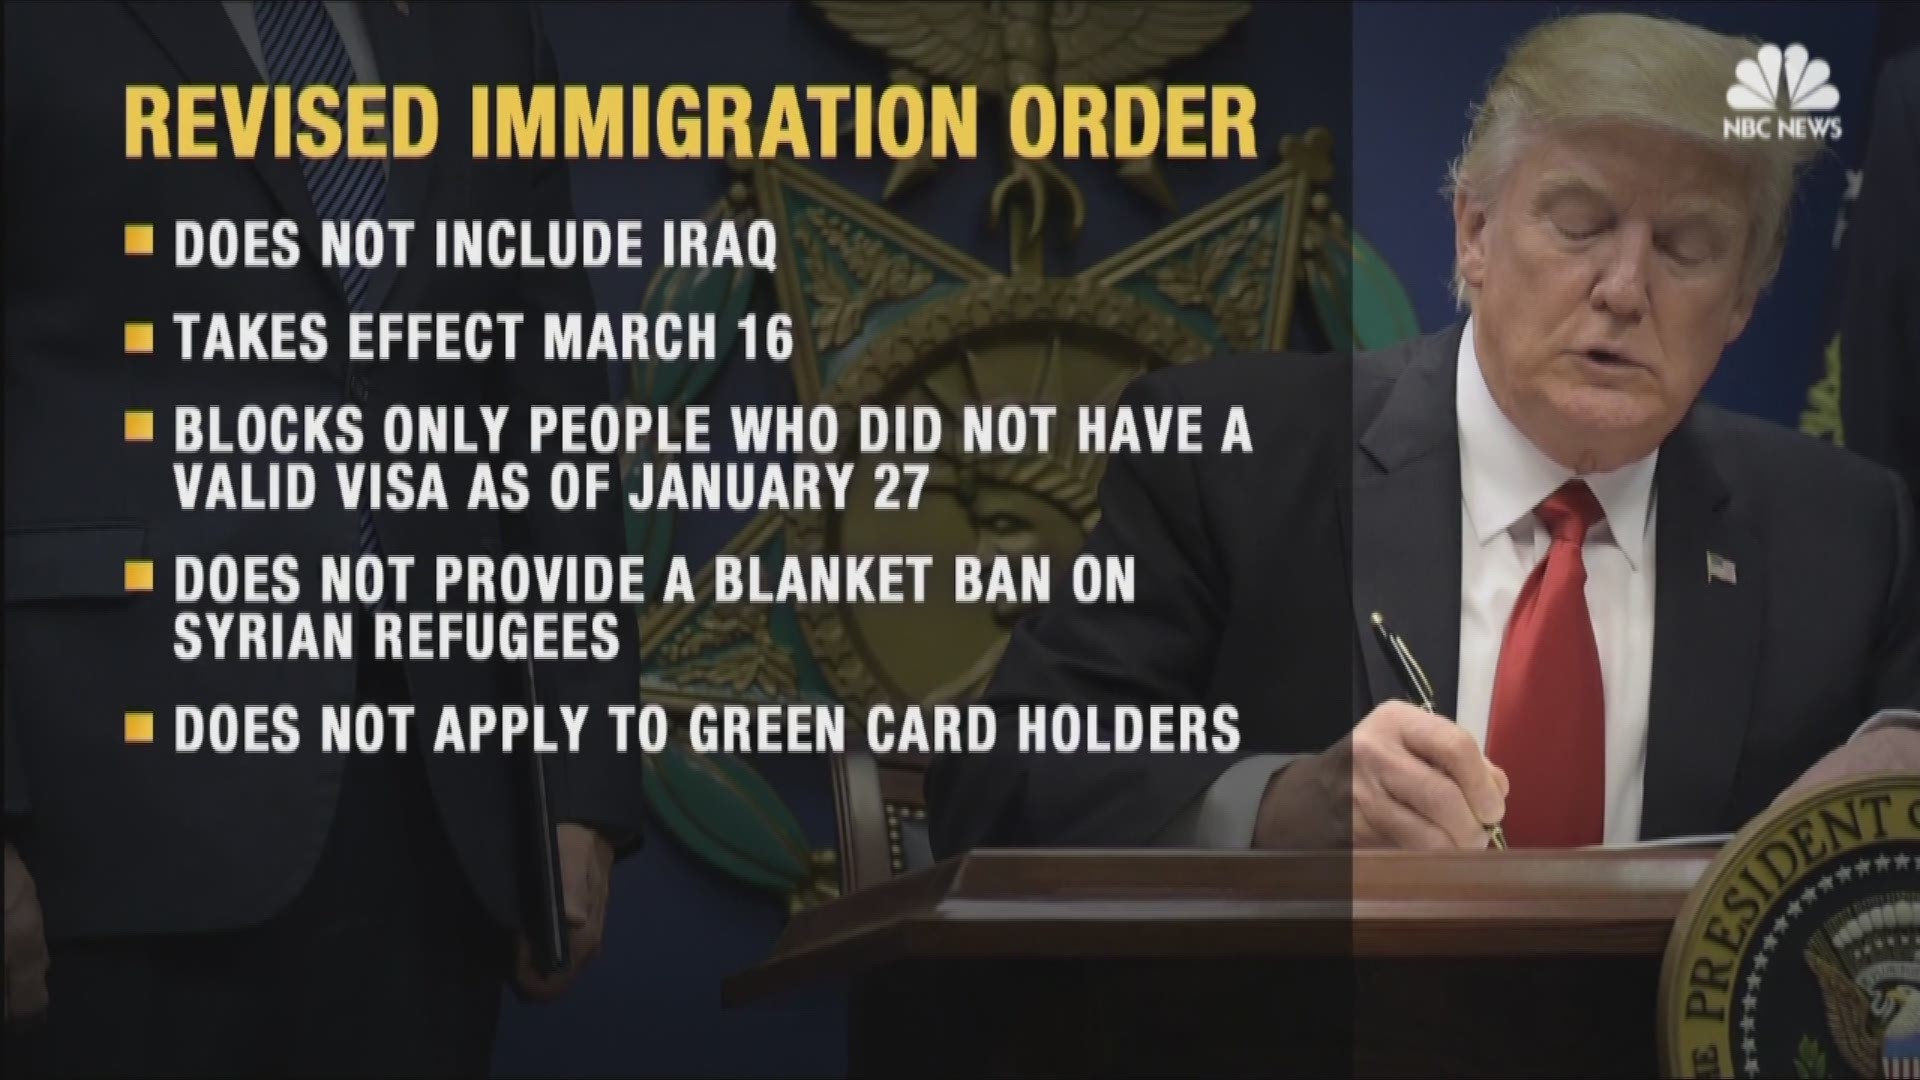 Trump administration officials announce a revised immigration order.